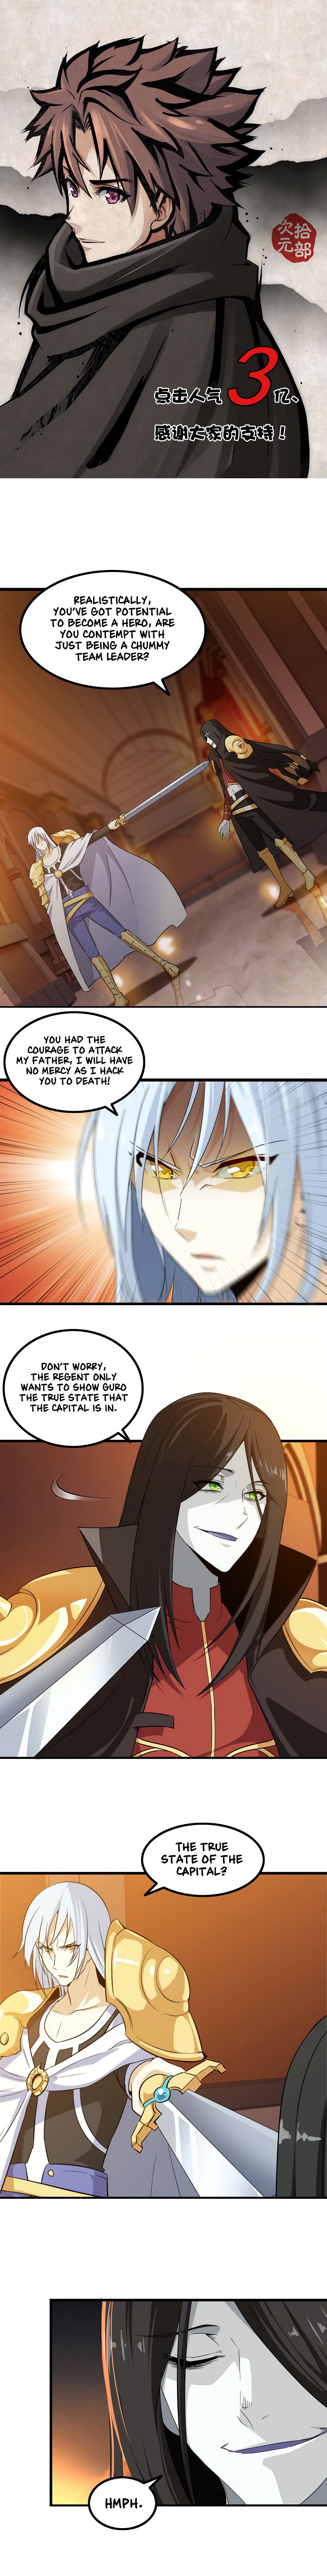 My Wife is a Demon Queen - Chapter 7565 - Image 1